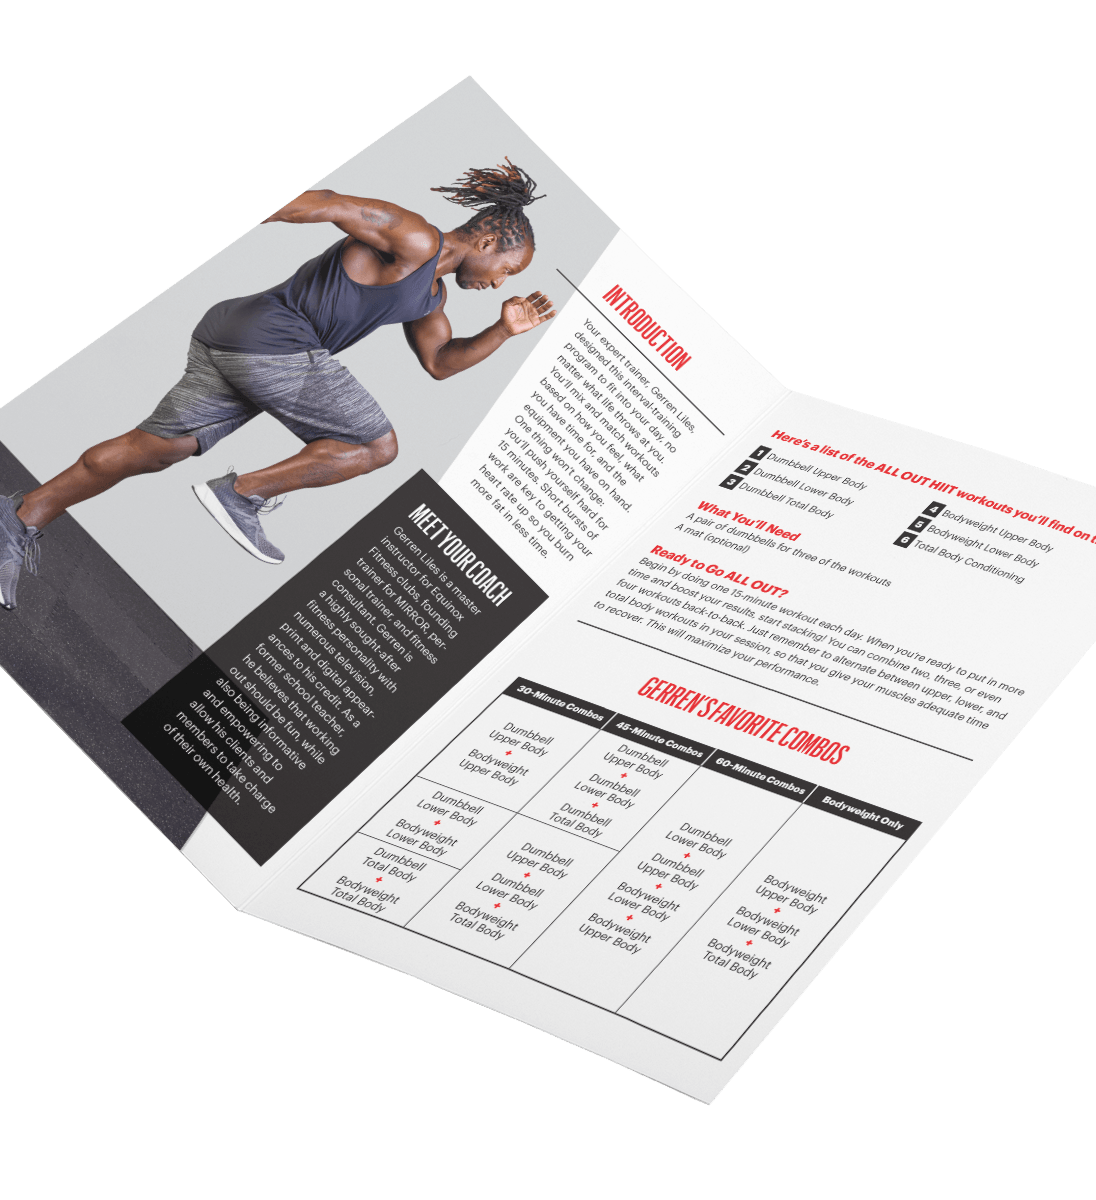 Men S Health All Out Hiit Dvd